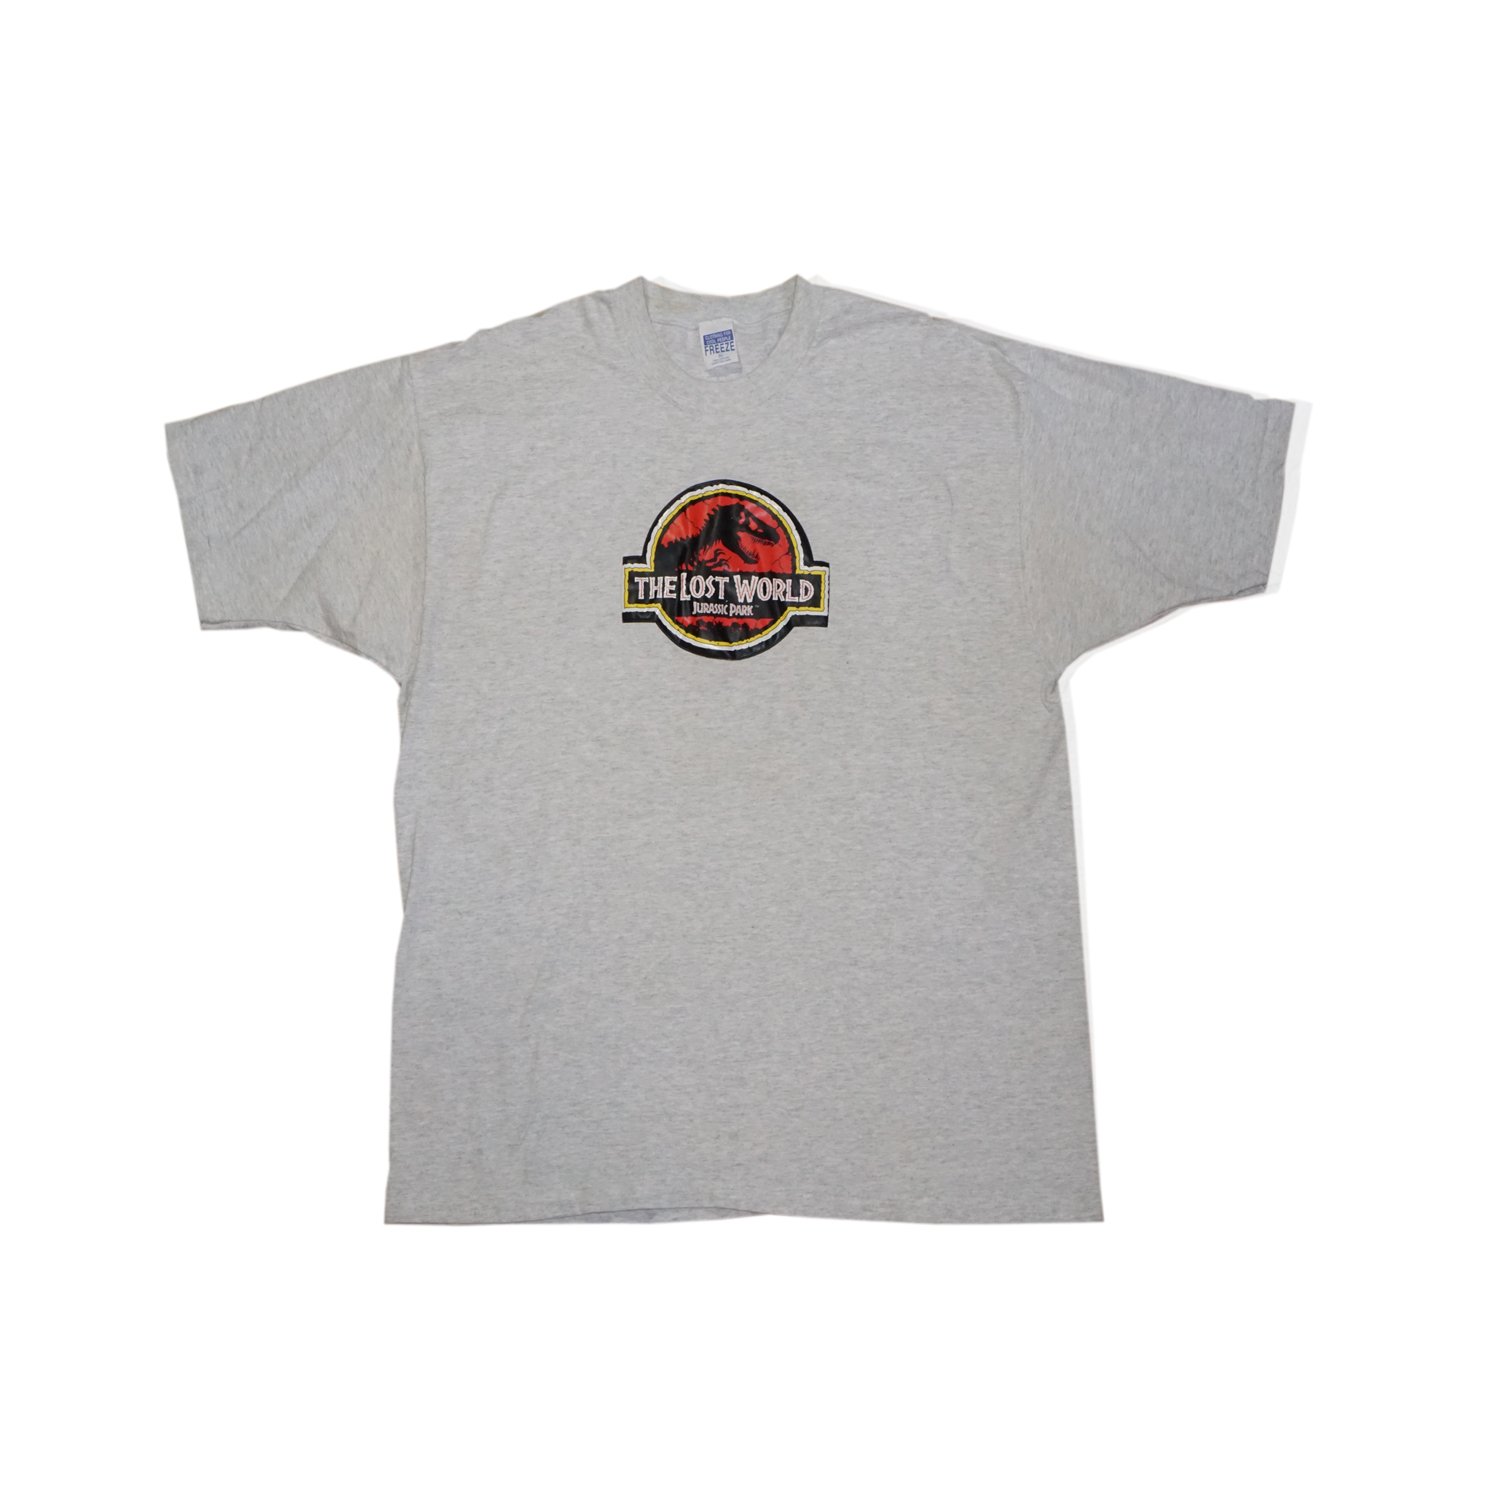 Vintage Jurassic Park: The Lost World Promo T-Shirt (Sam Russo Collection)